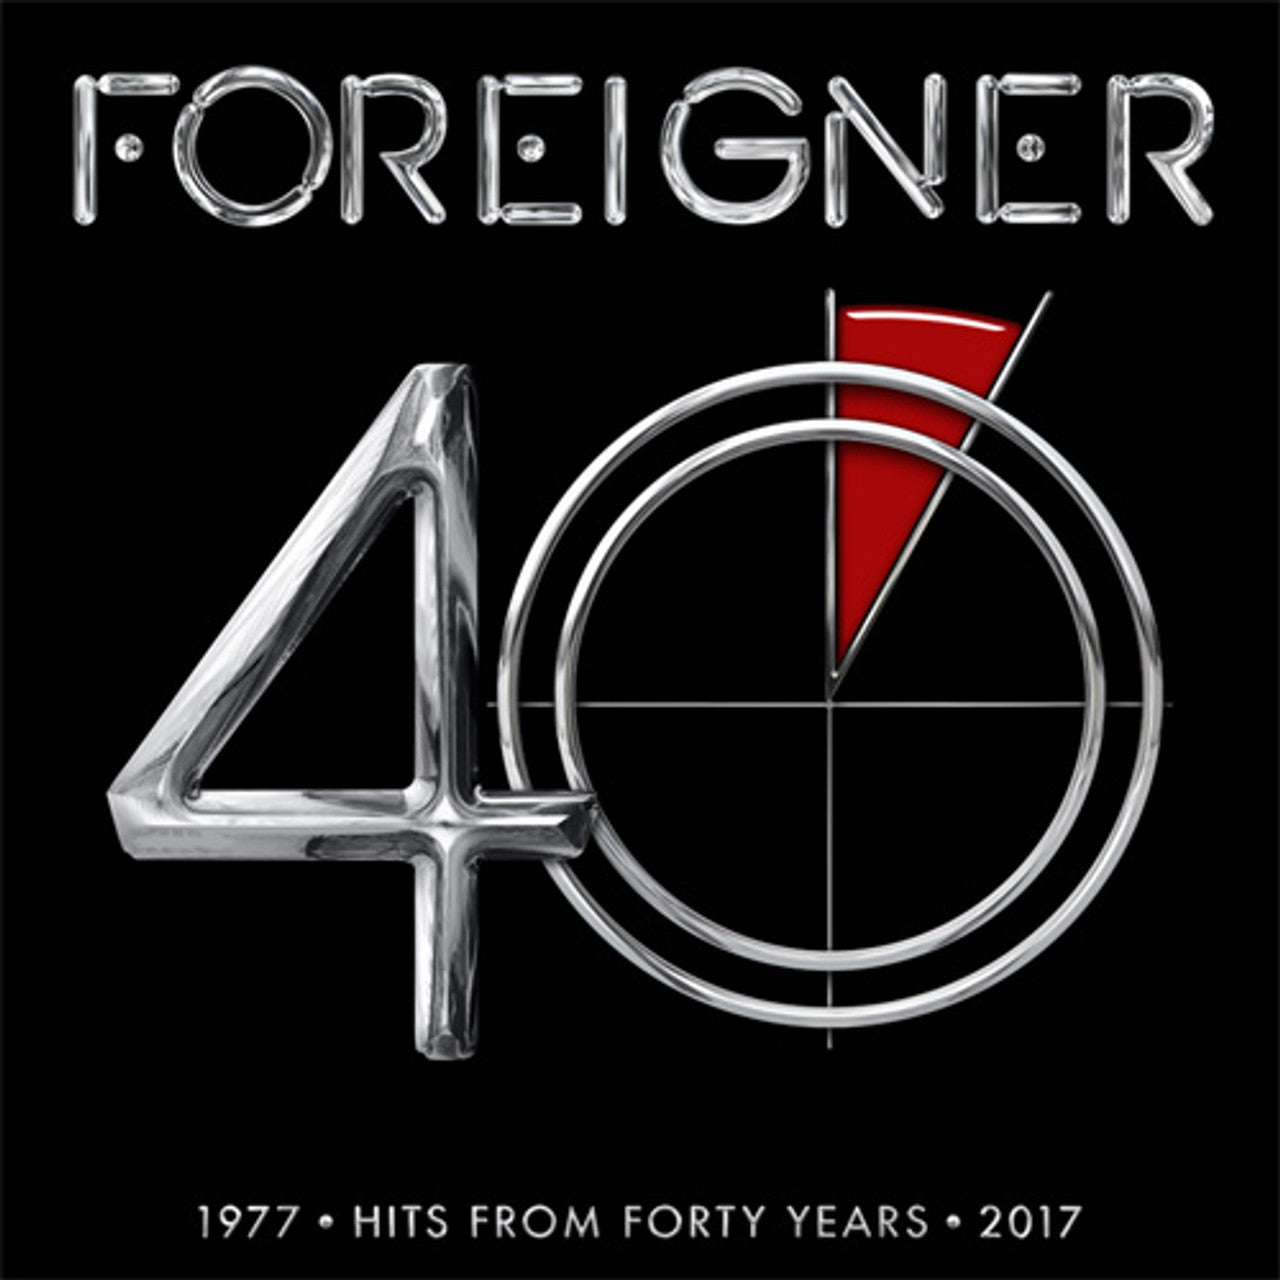 FOREIGNER - 40: HITS FROM 40 YEARS (1977-2017) - 2-LP - VINYL LP